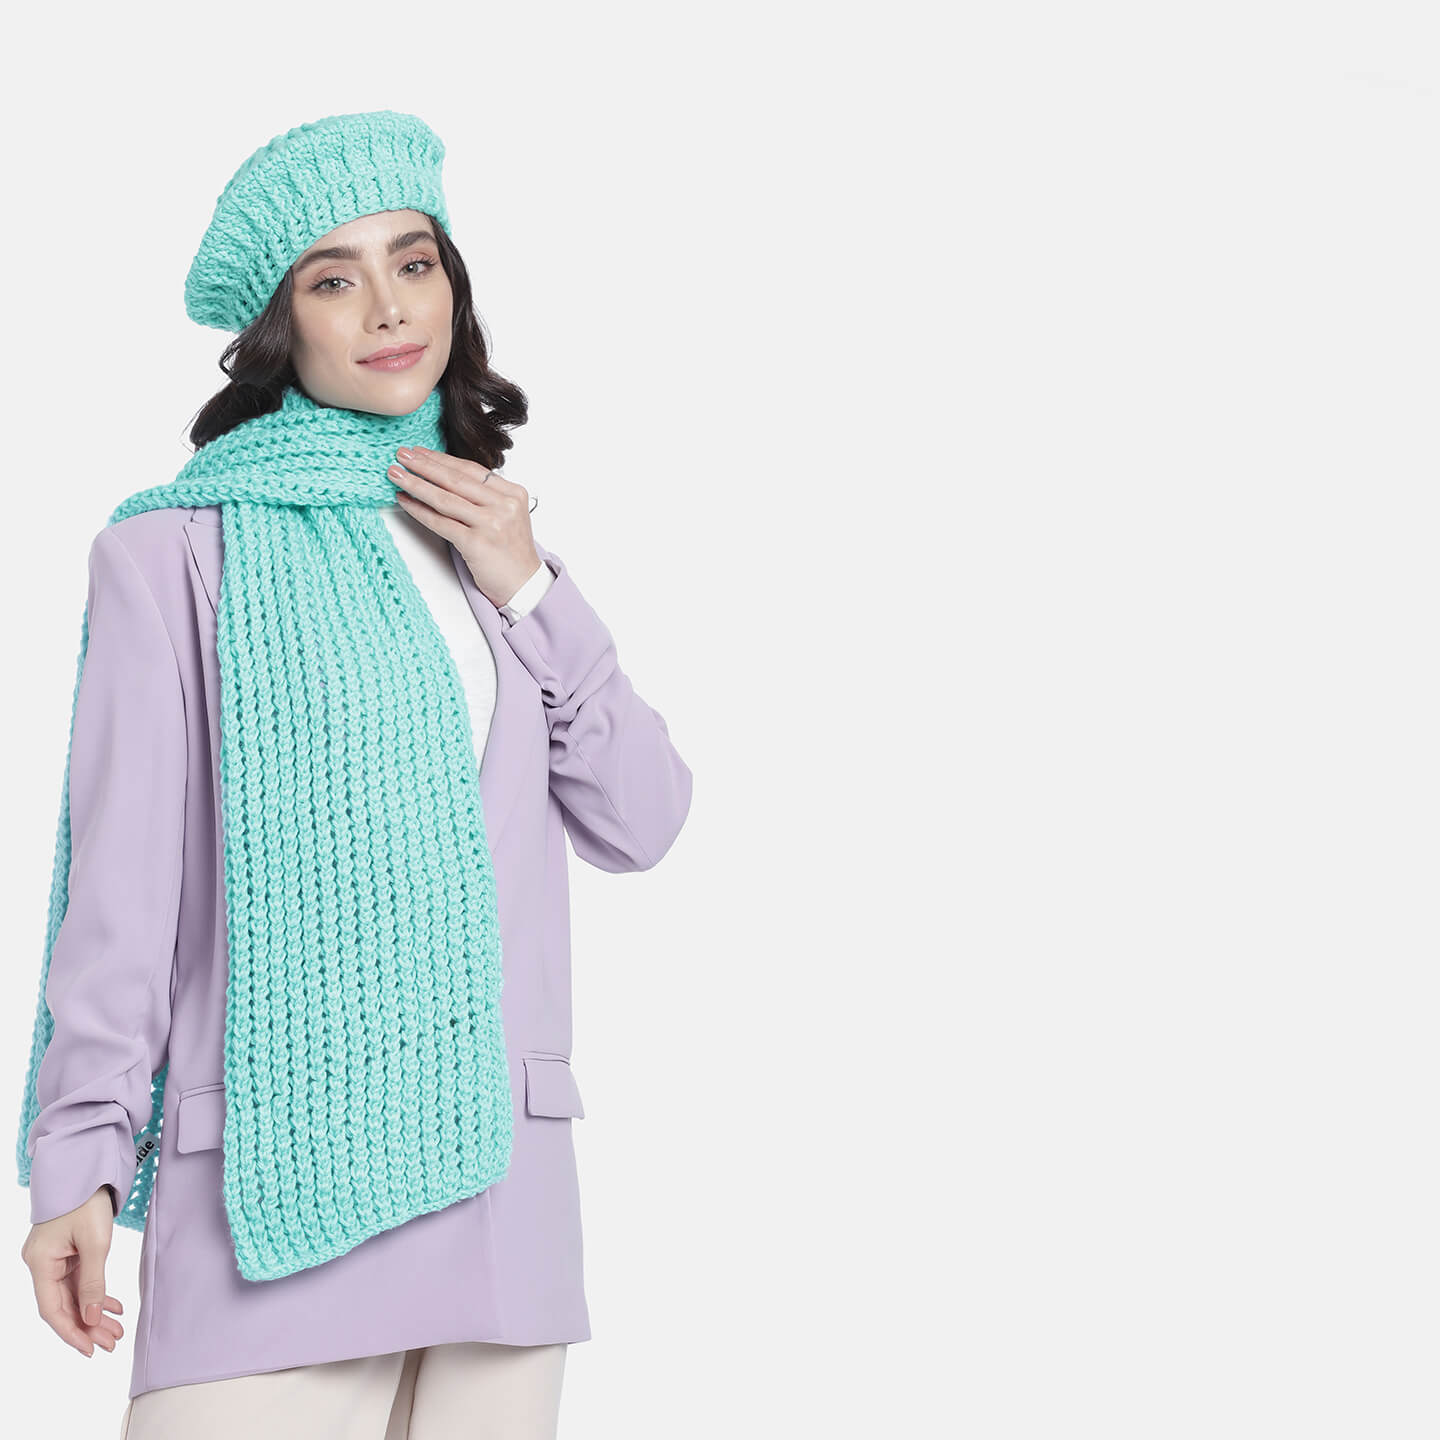 Beanie and Scarf Coordinating Set - 3188